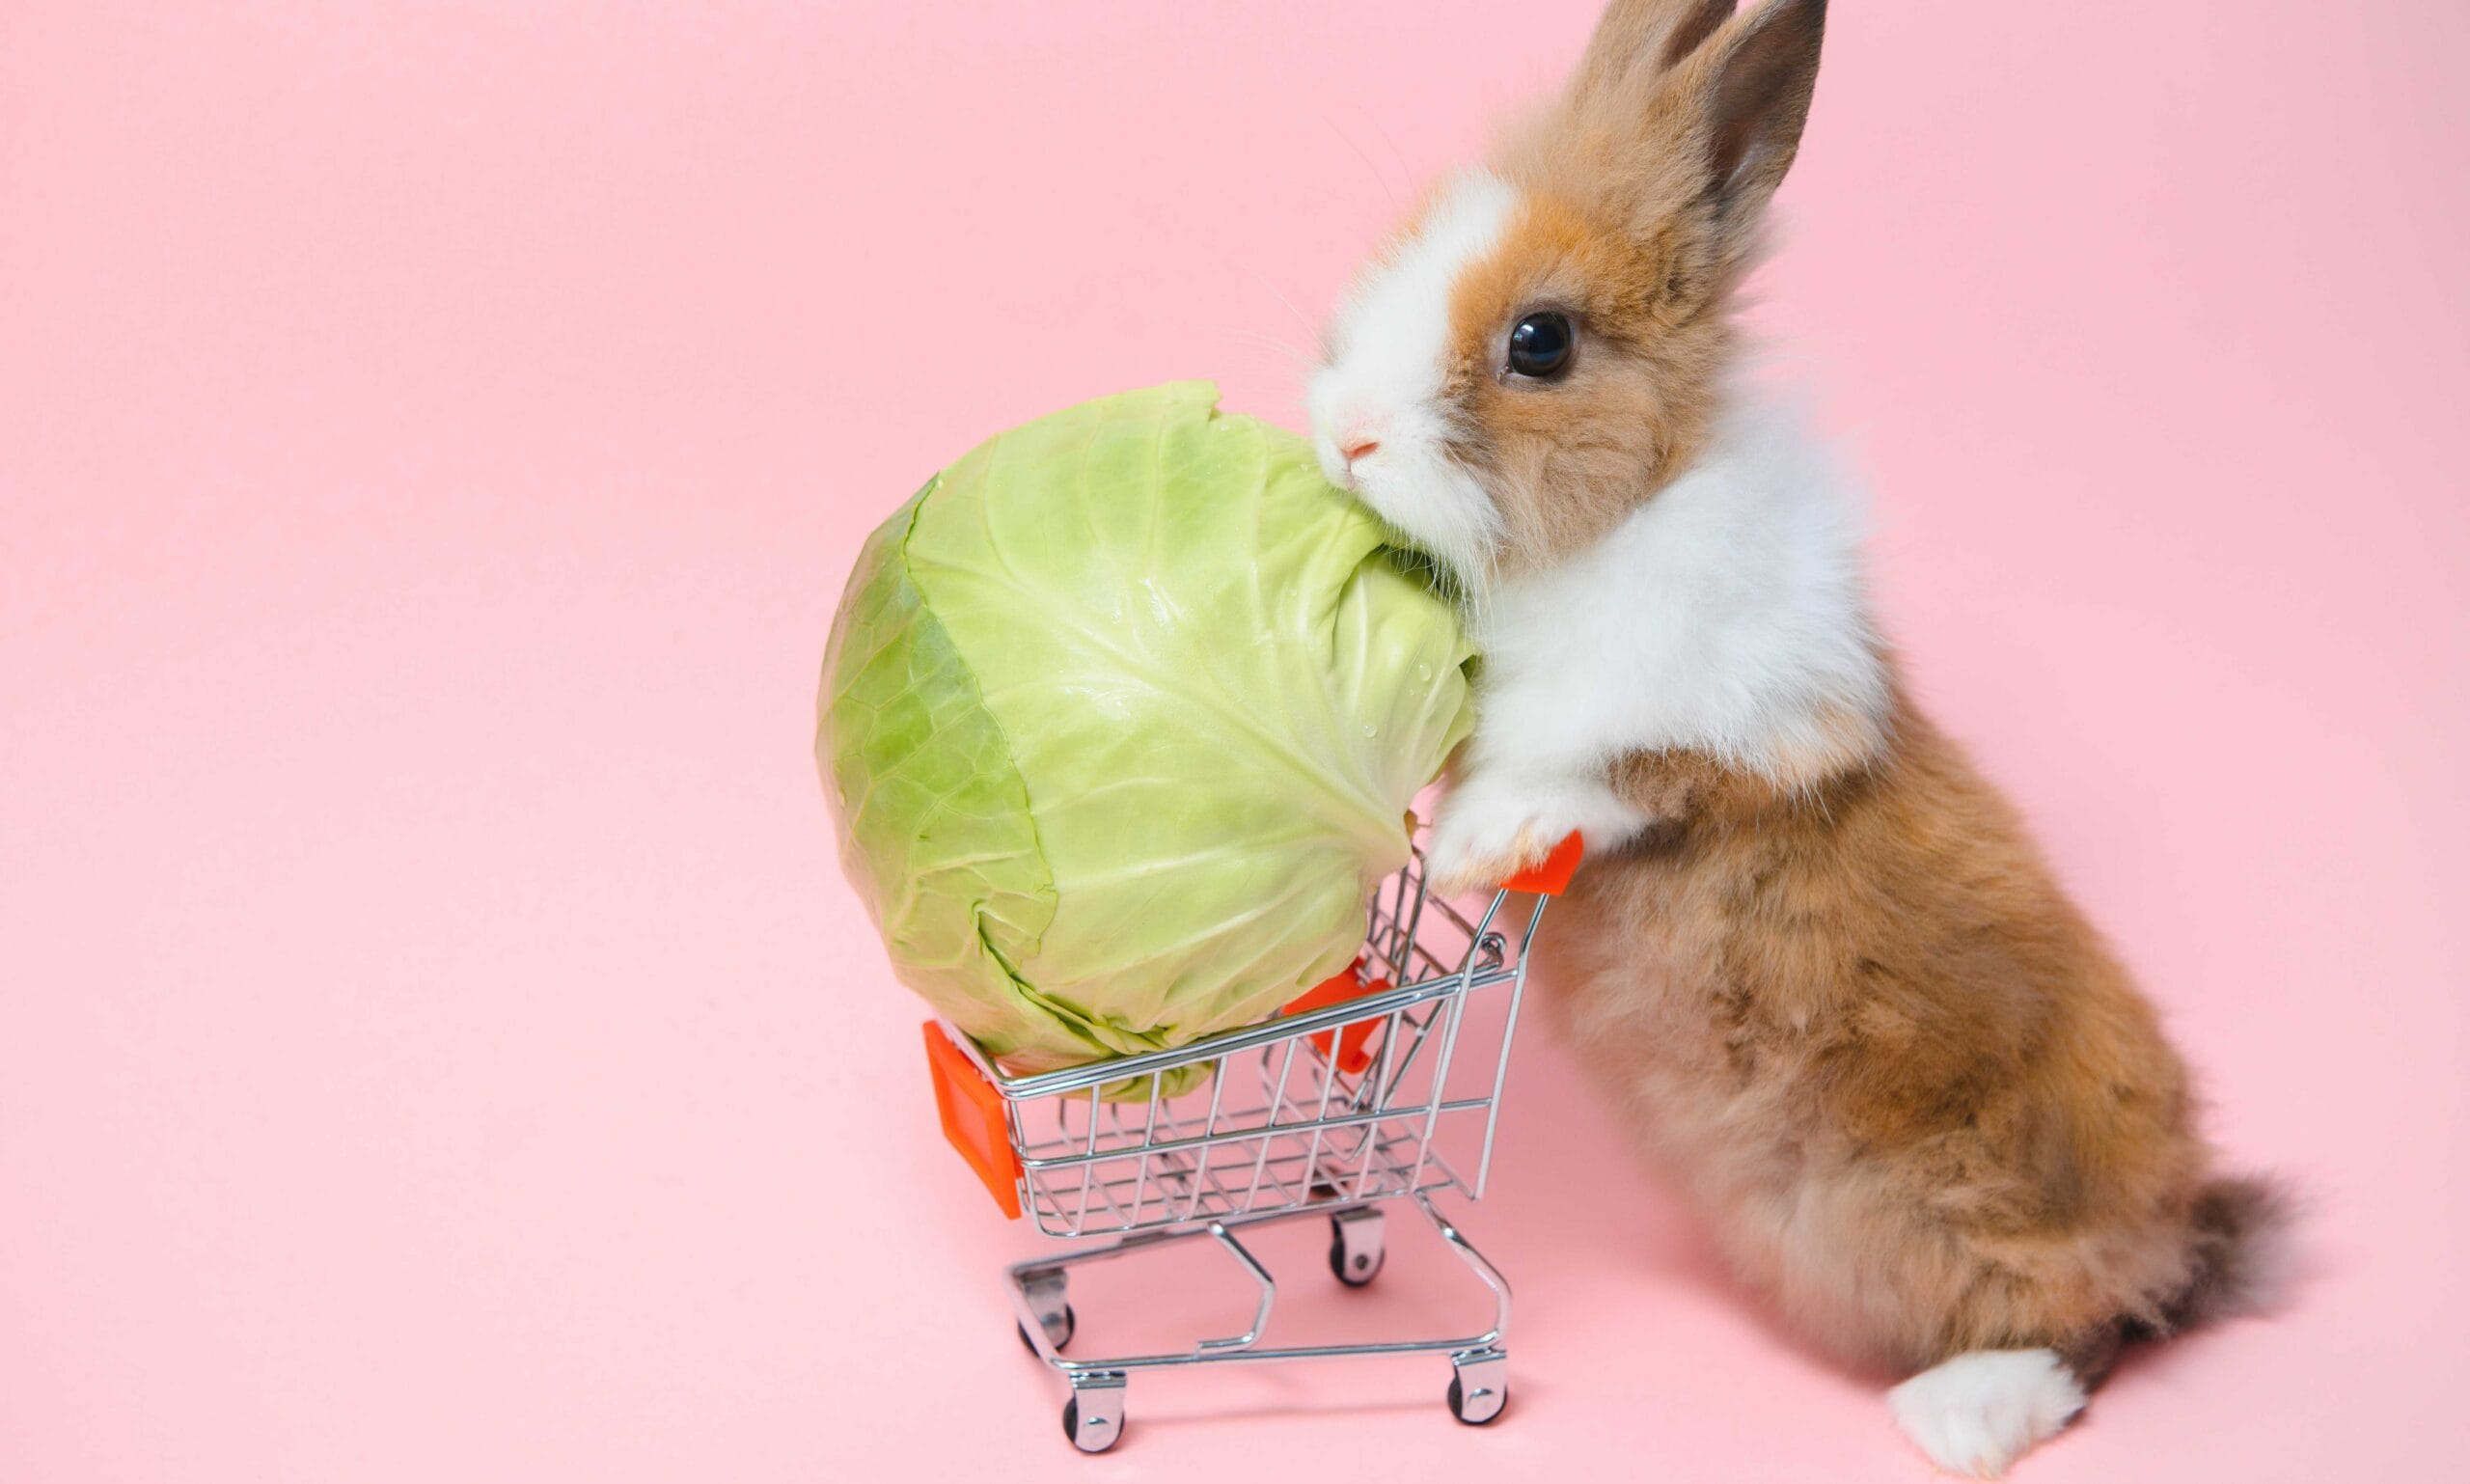 fruits and vegetables for rabbits: rabbit with cabbage